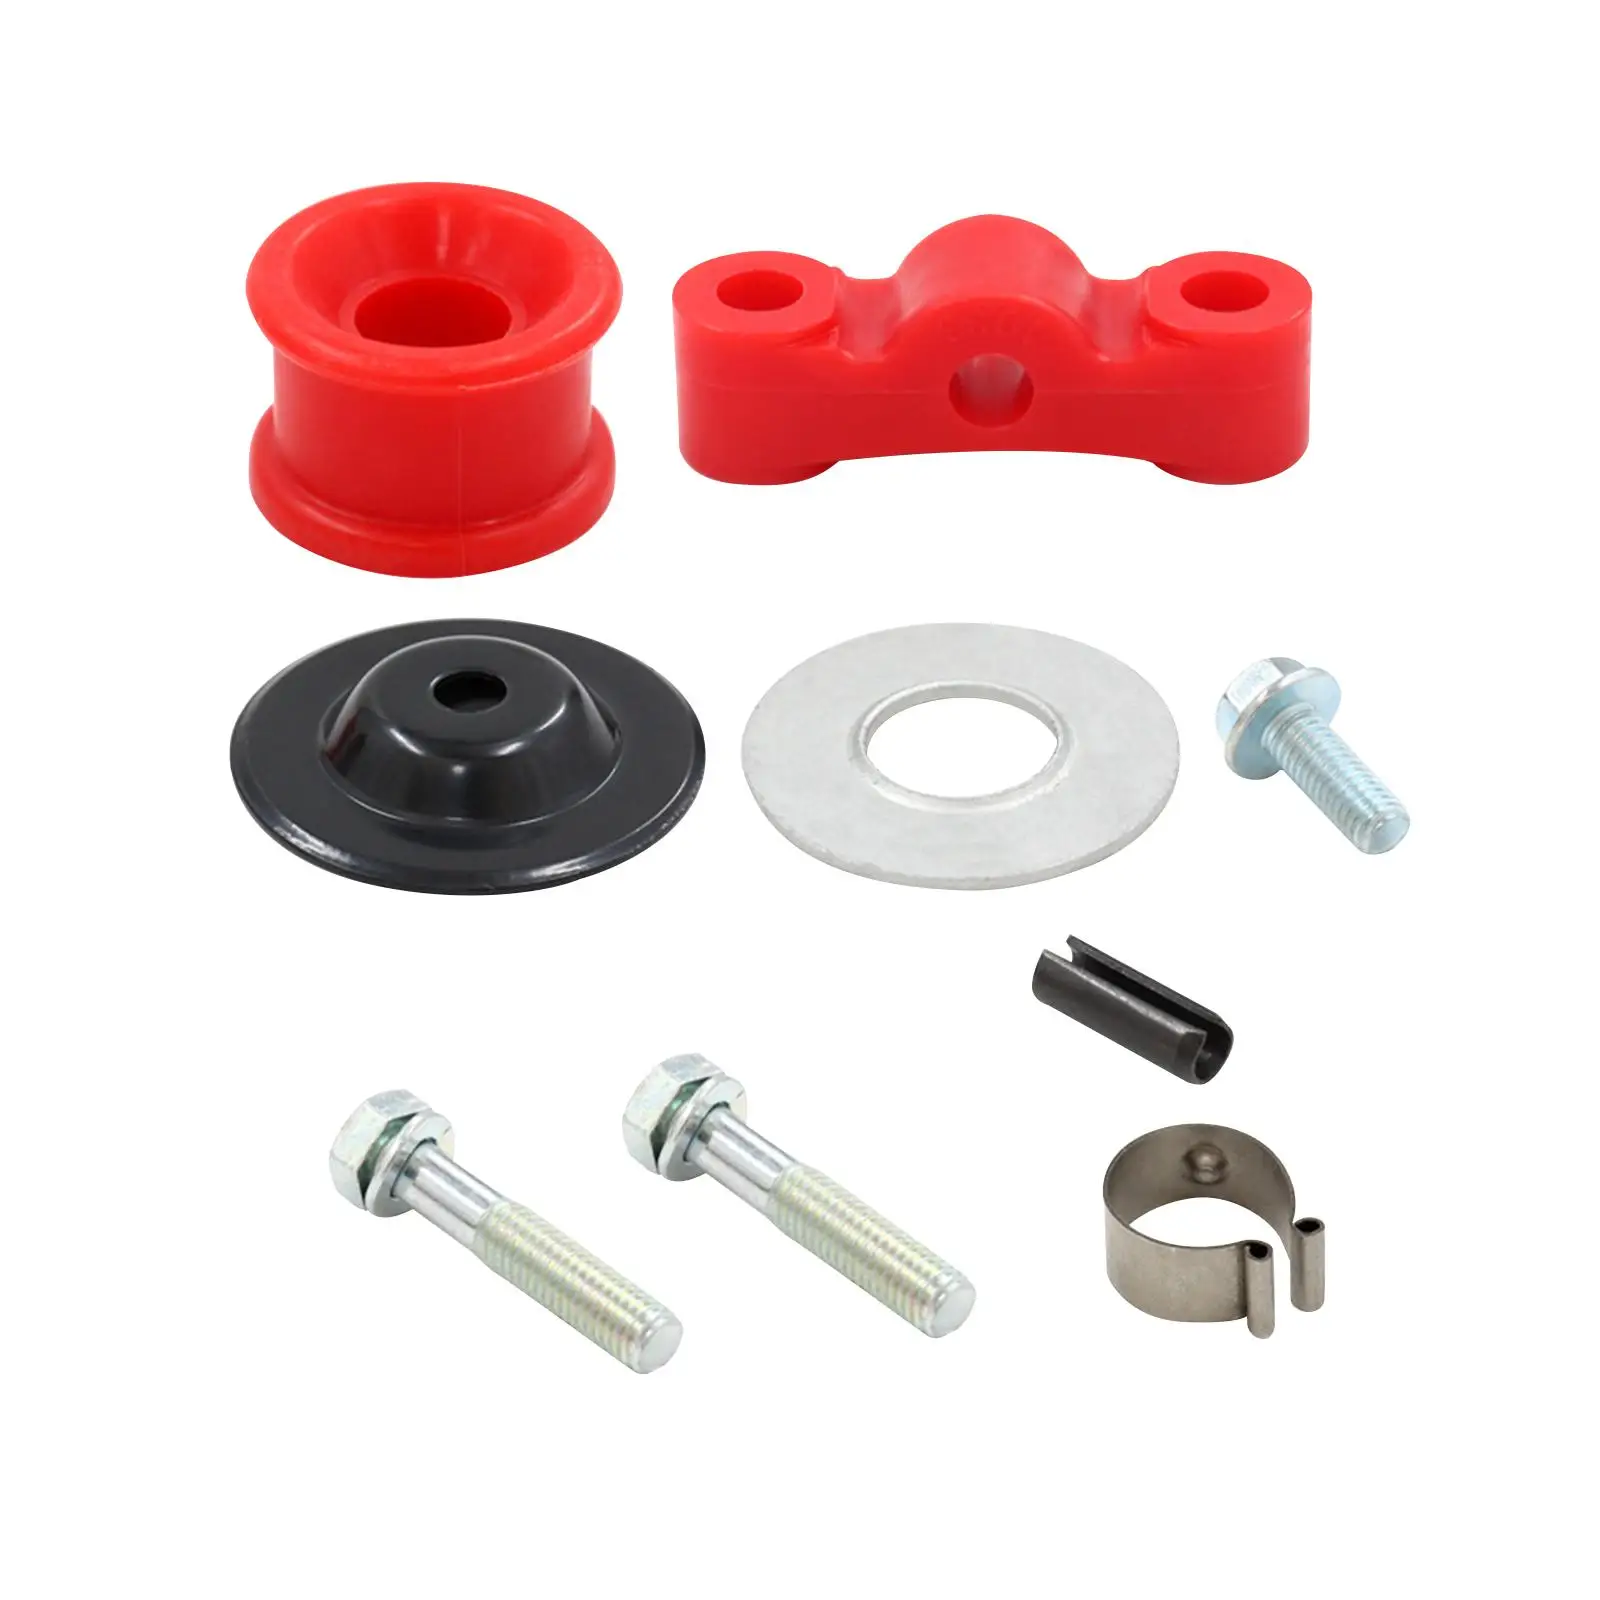 Shifter Stabilizer Bushing Kit for Integra B Series and Energy Bushing Replace Shifter Linkage Hardware Pin and Clip